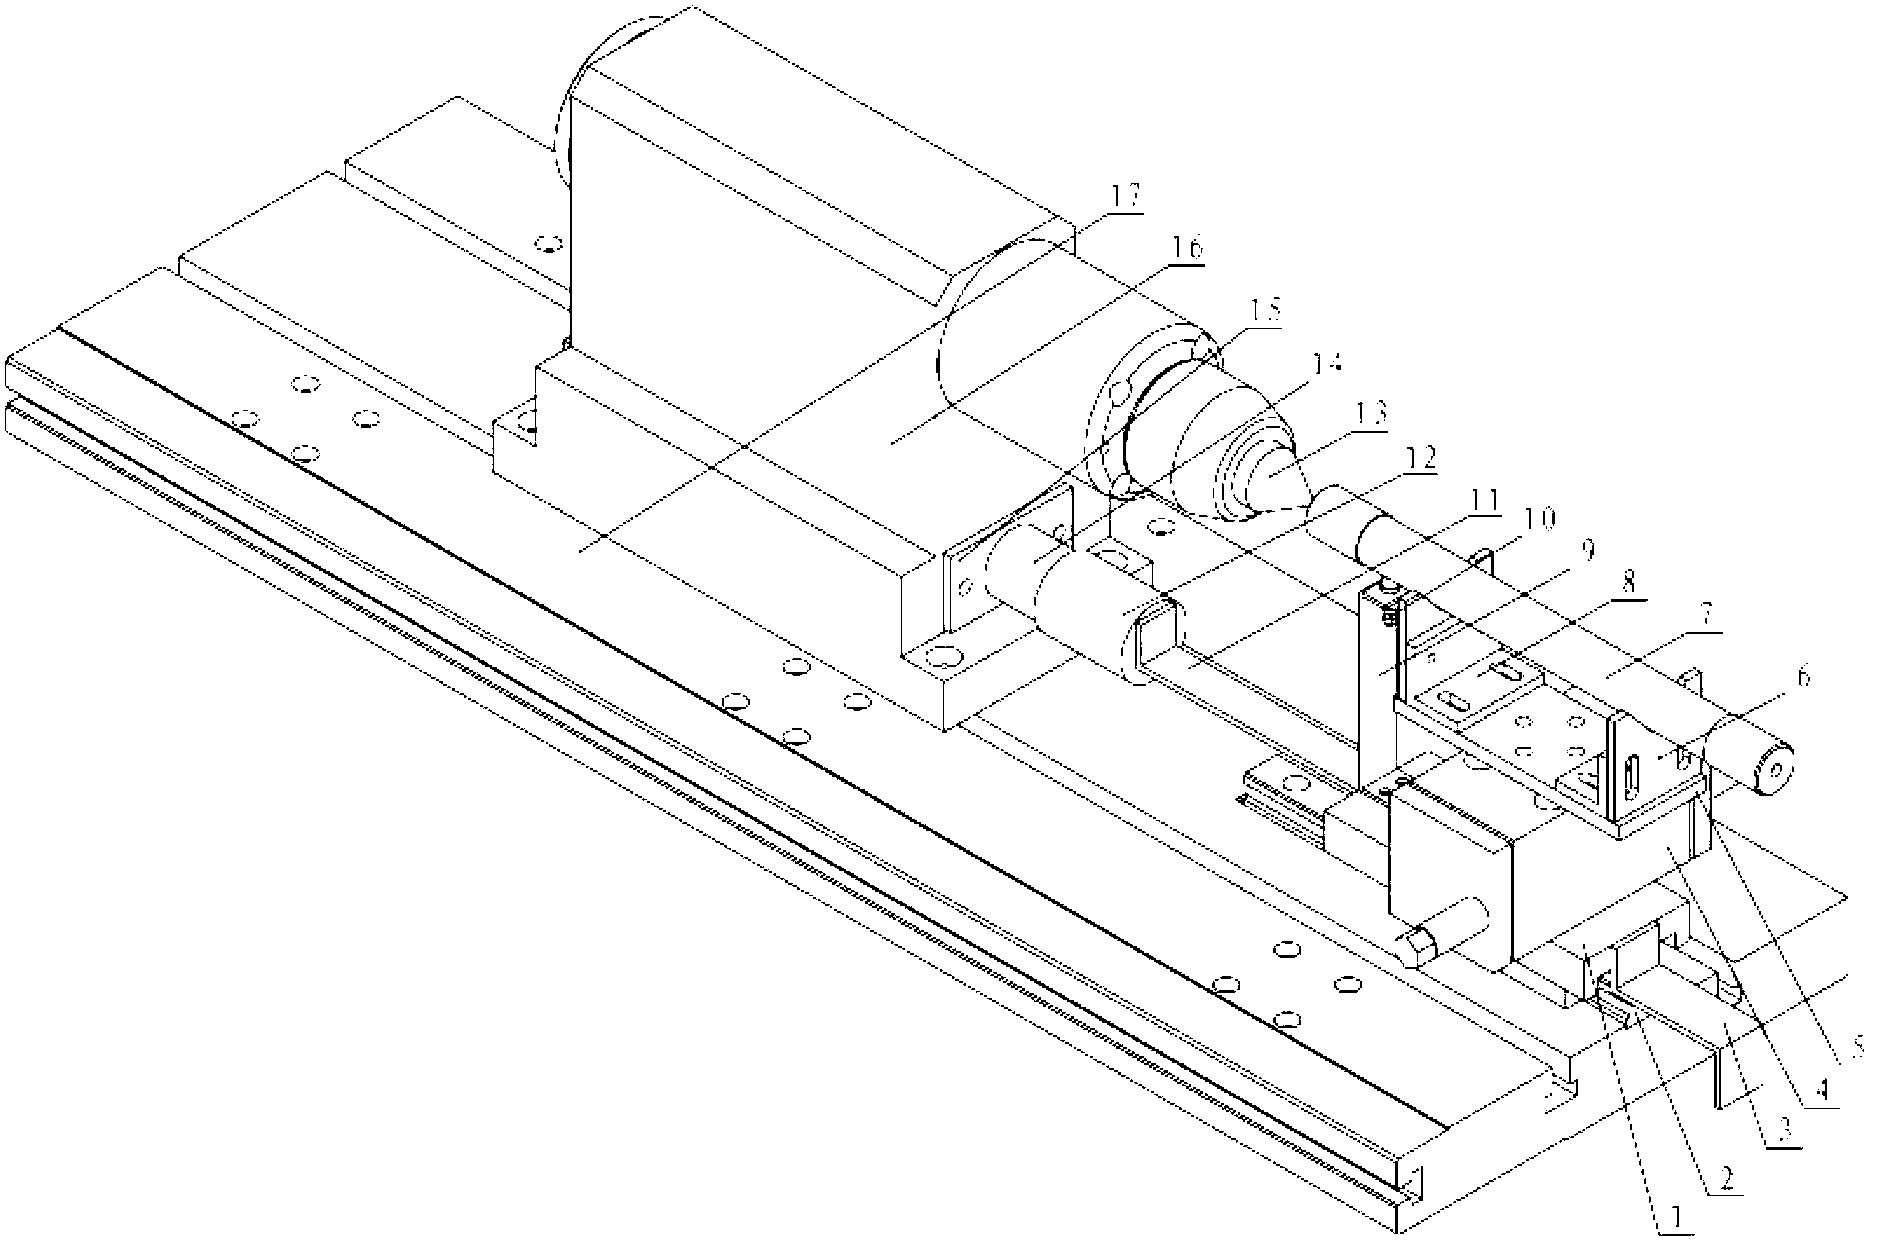 Automatic rotation part for support material